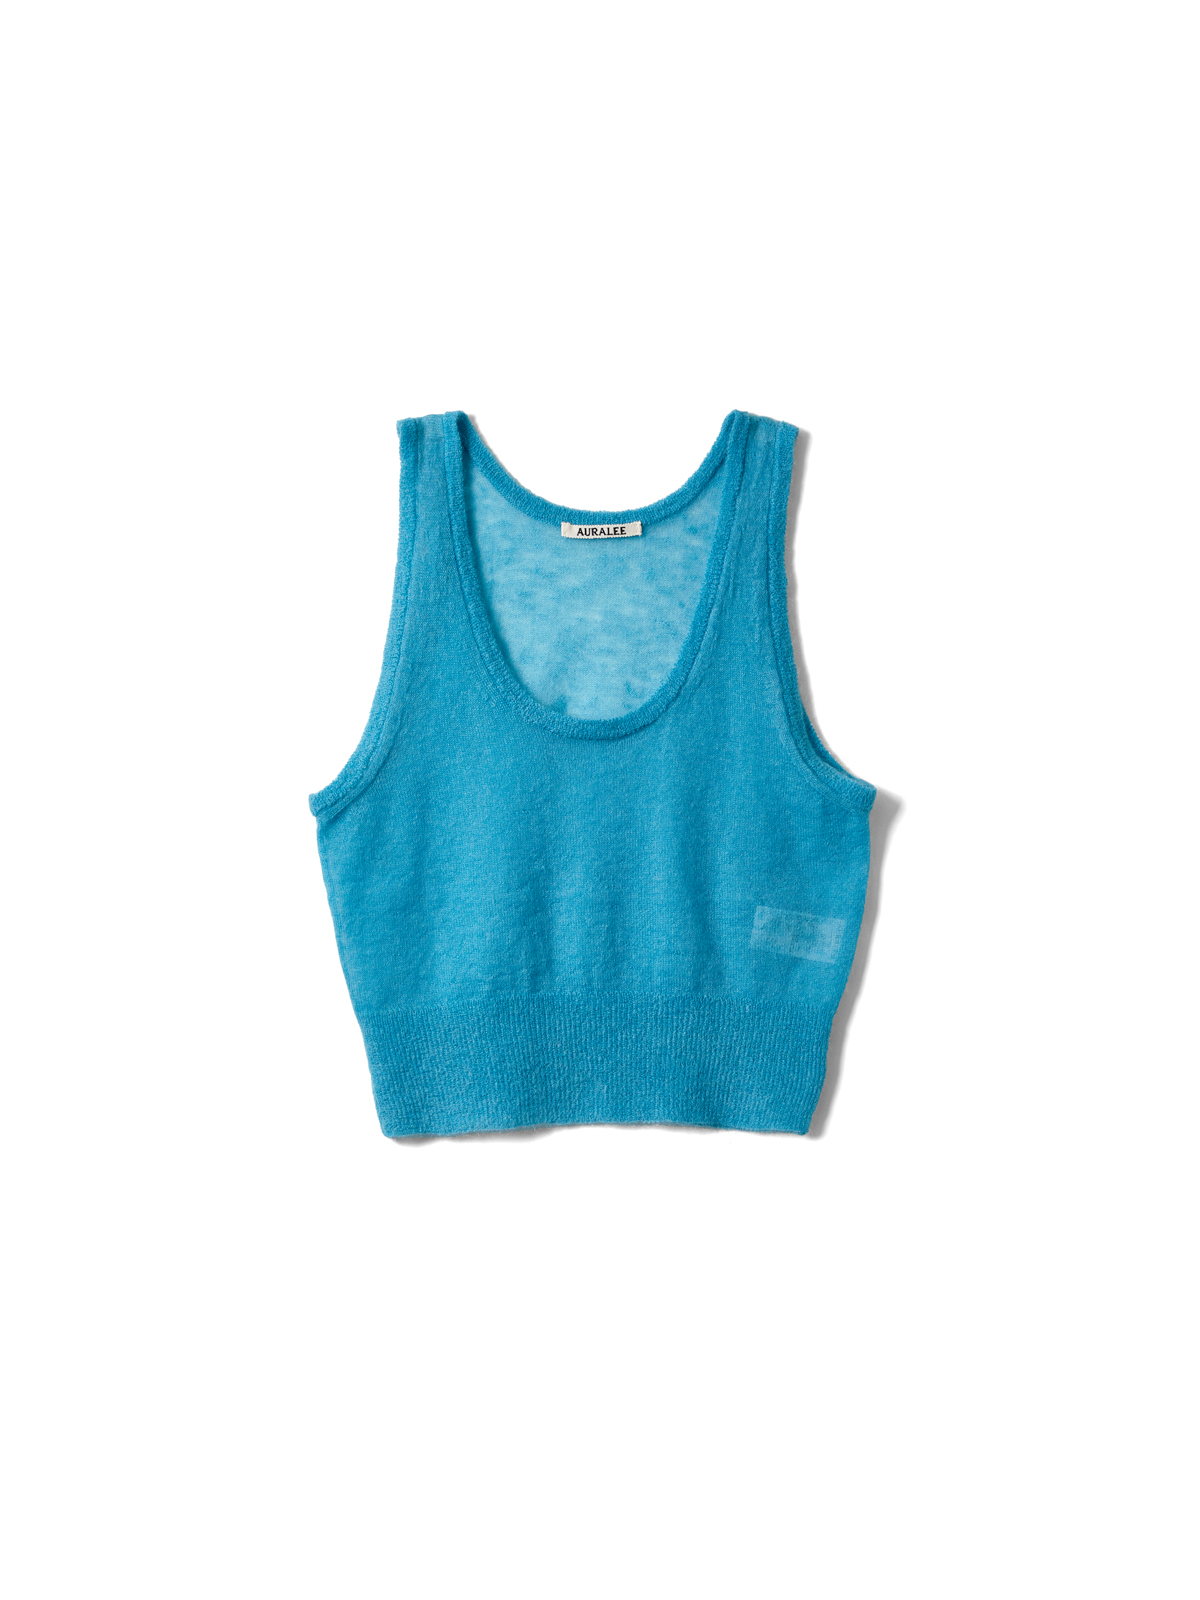 KID MOHAIR SHEER KNIT TANK (TURQUOISE BLUE)